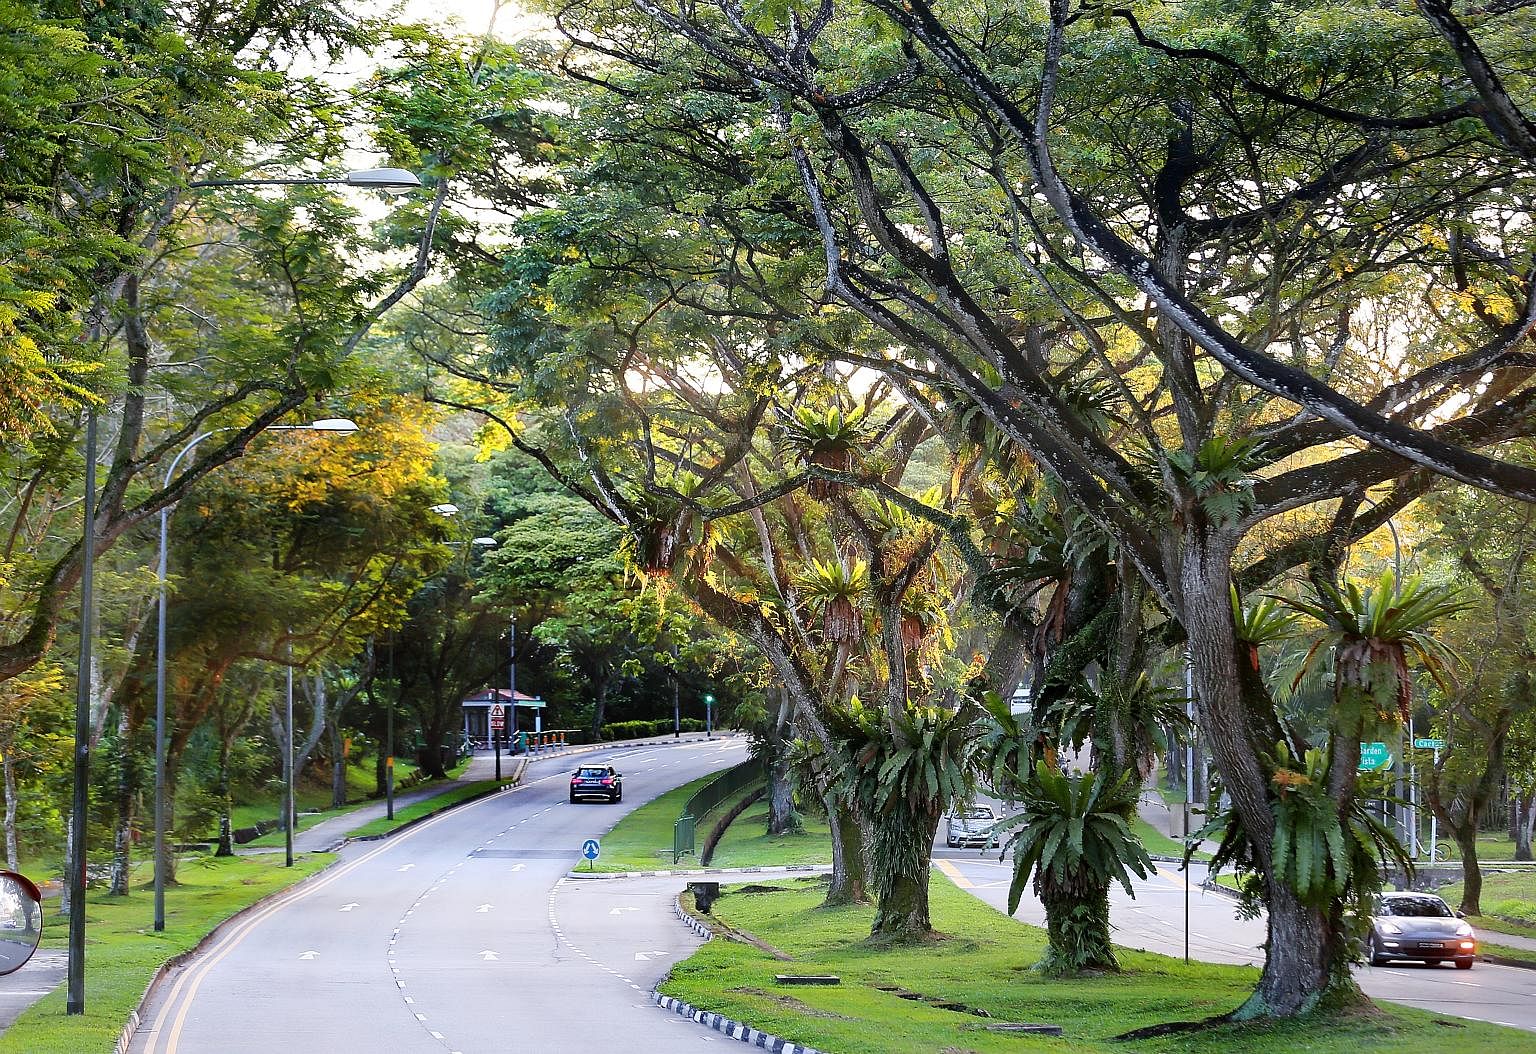 The writer calls a 1 1/2km stretch of Yio Chu Kang Road his "refuge". This green belt is where he usually goes for his Sunday walks, to get away from life's "pesky little irritations". Driving shows you nothing, he says. Instead, it is only when one 